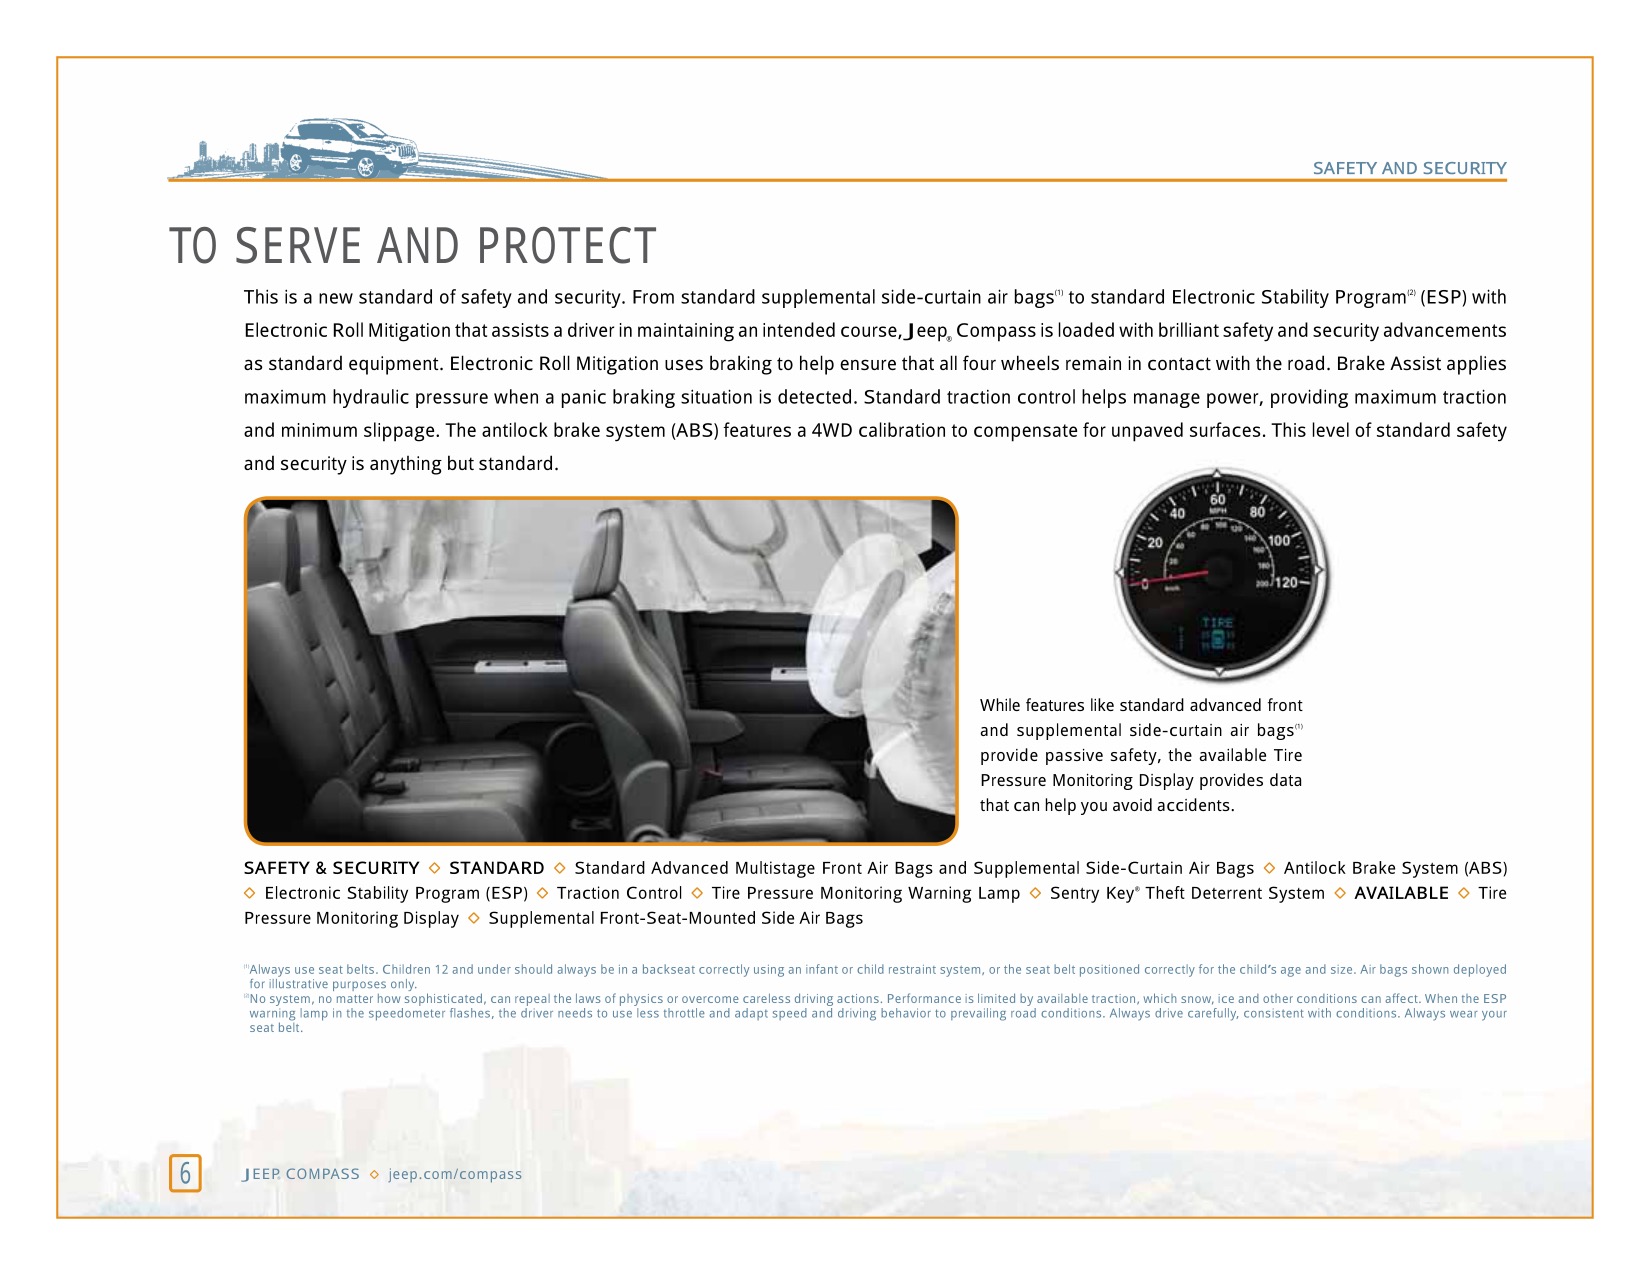 2008 Jeep Compass Brochure Page 5